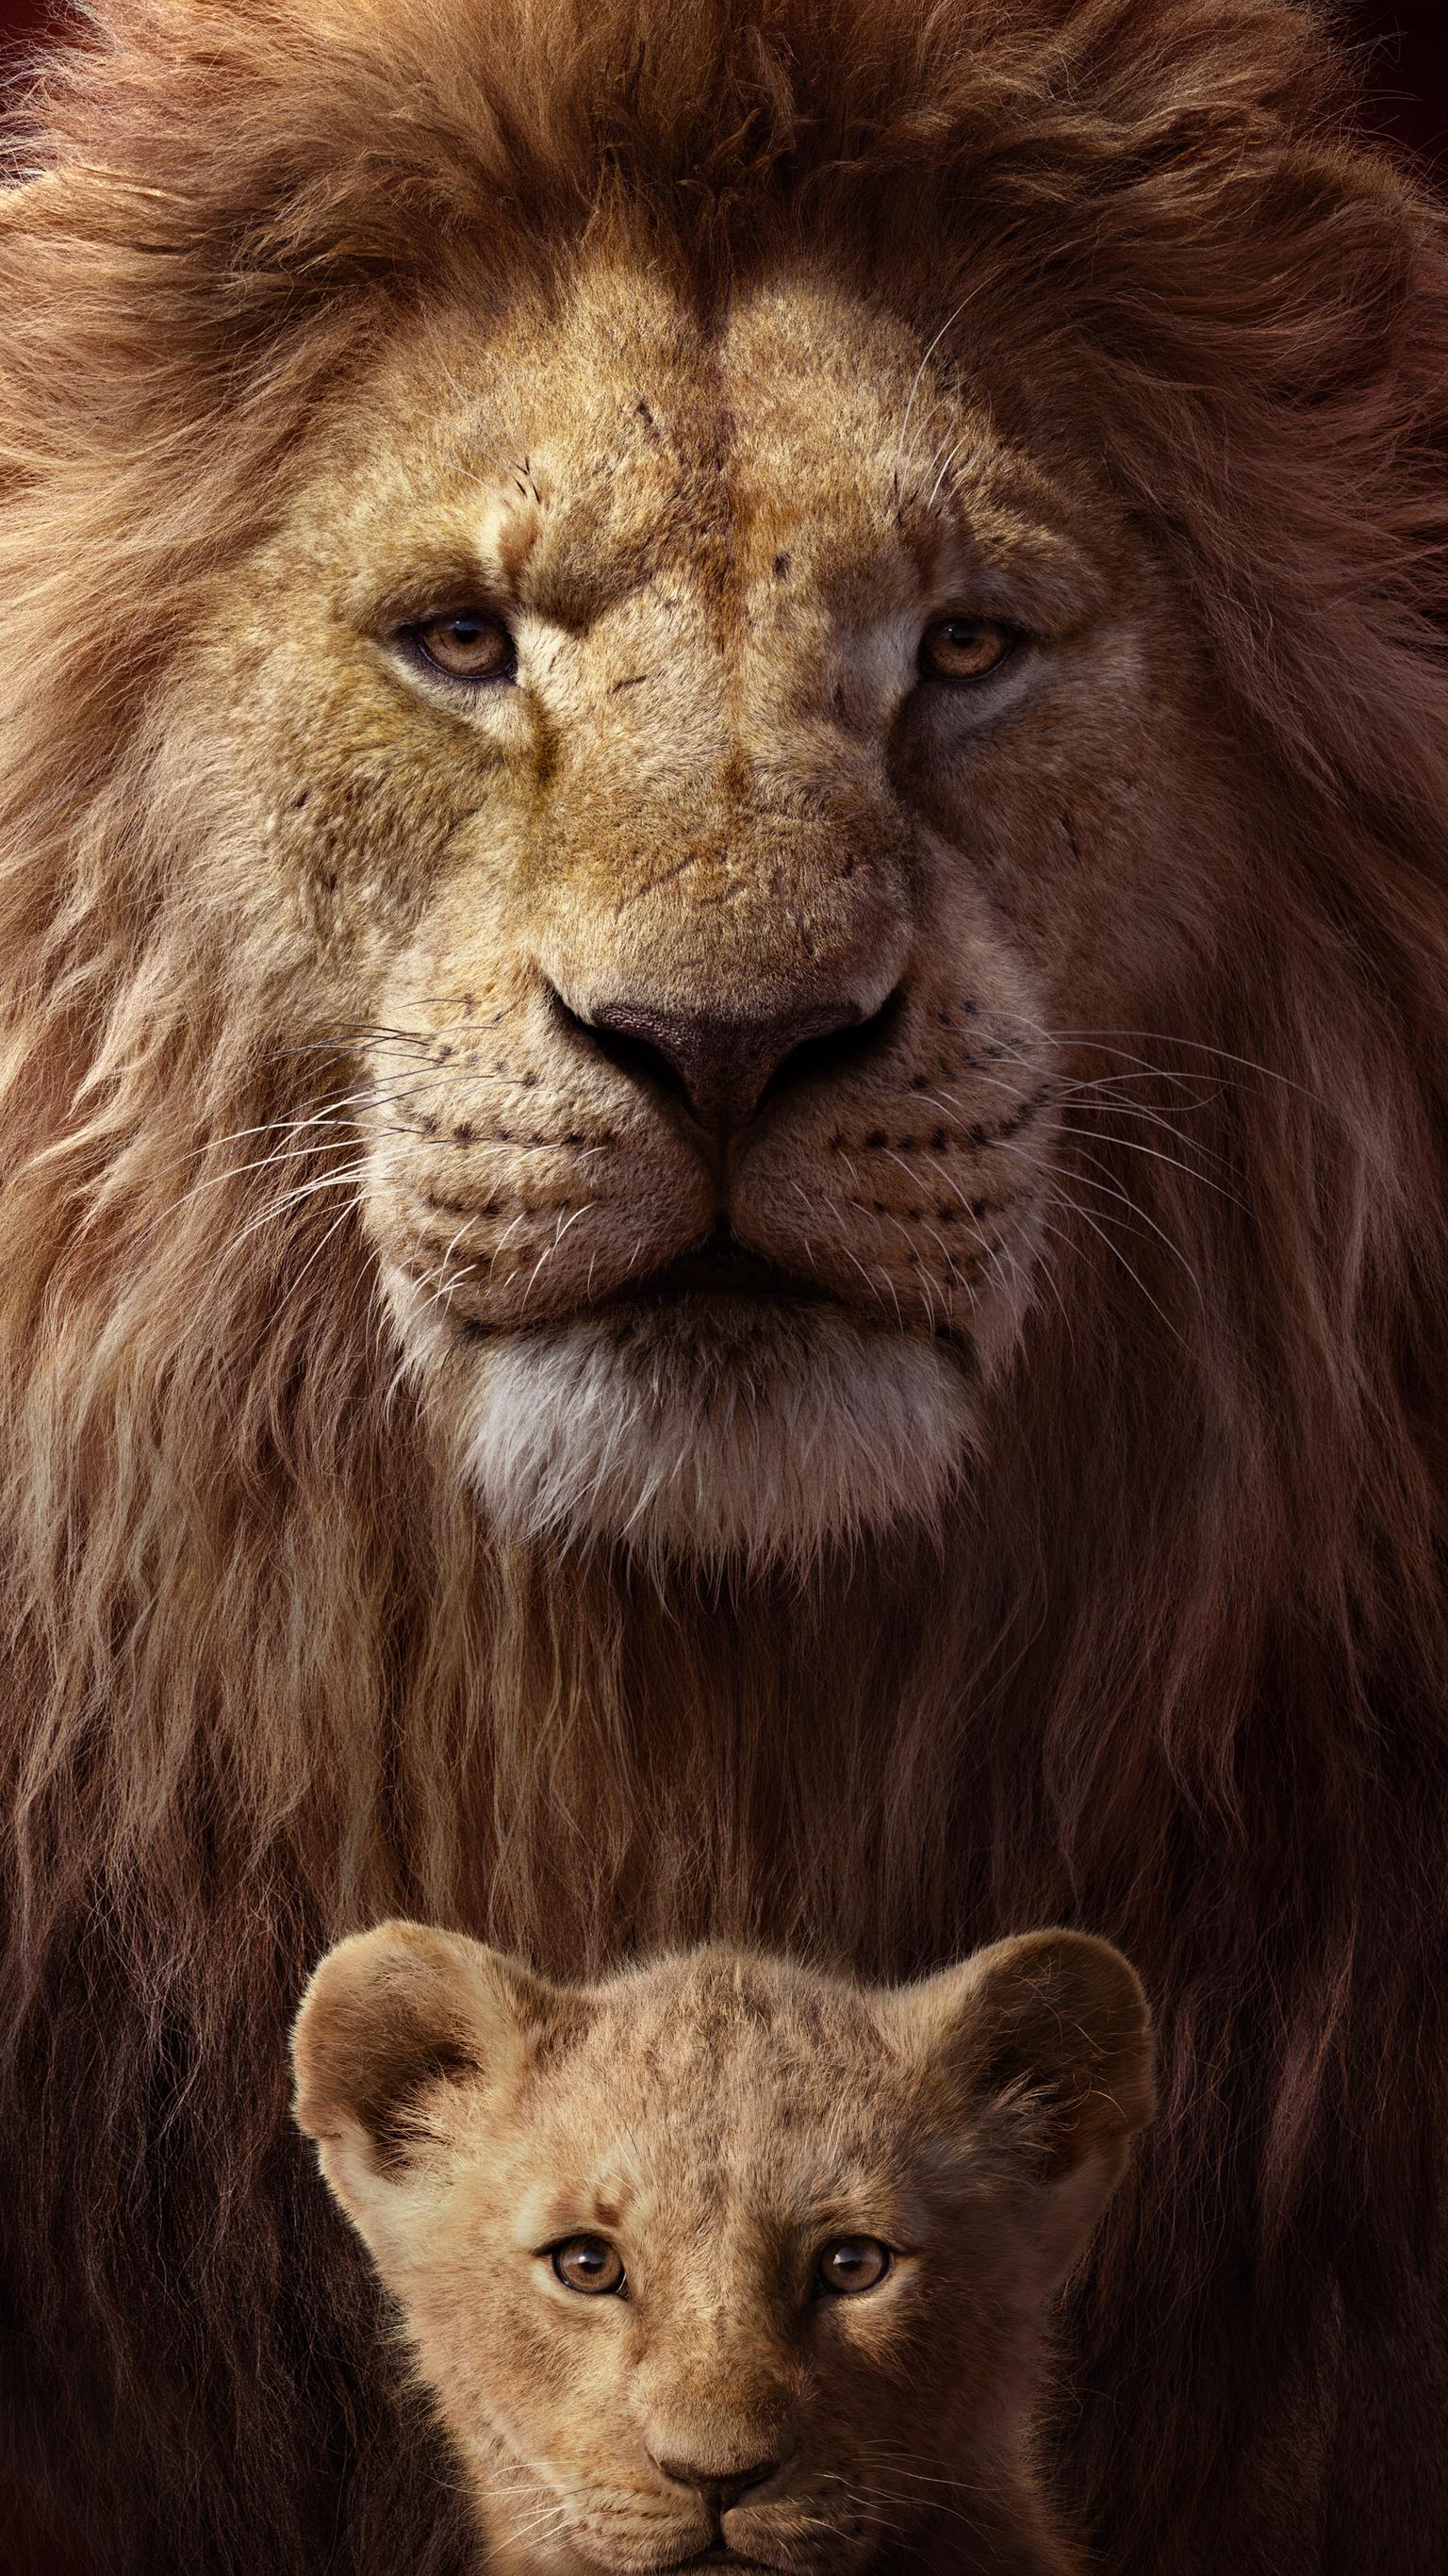 A lion and cub are shown in the poster - The Lion King